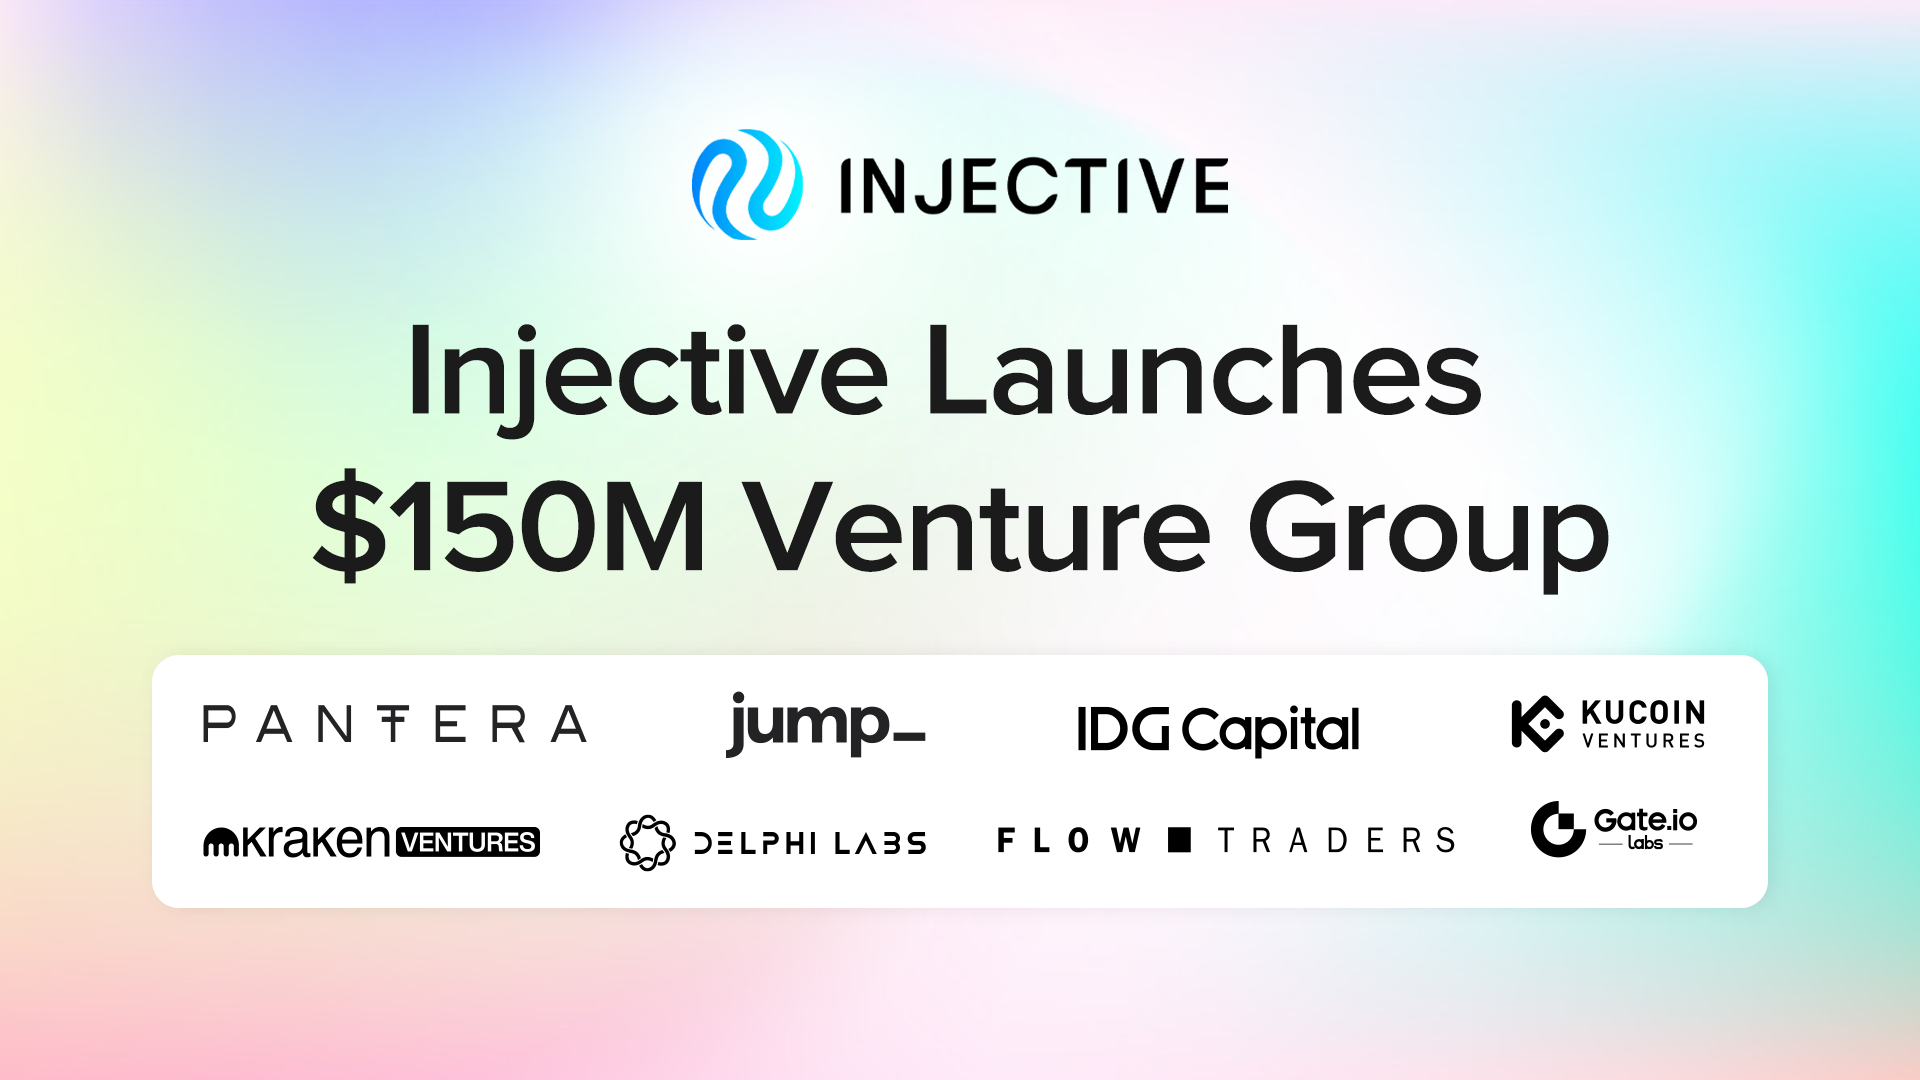 Injective Launches 150M Venture Group